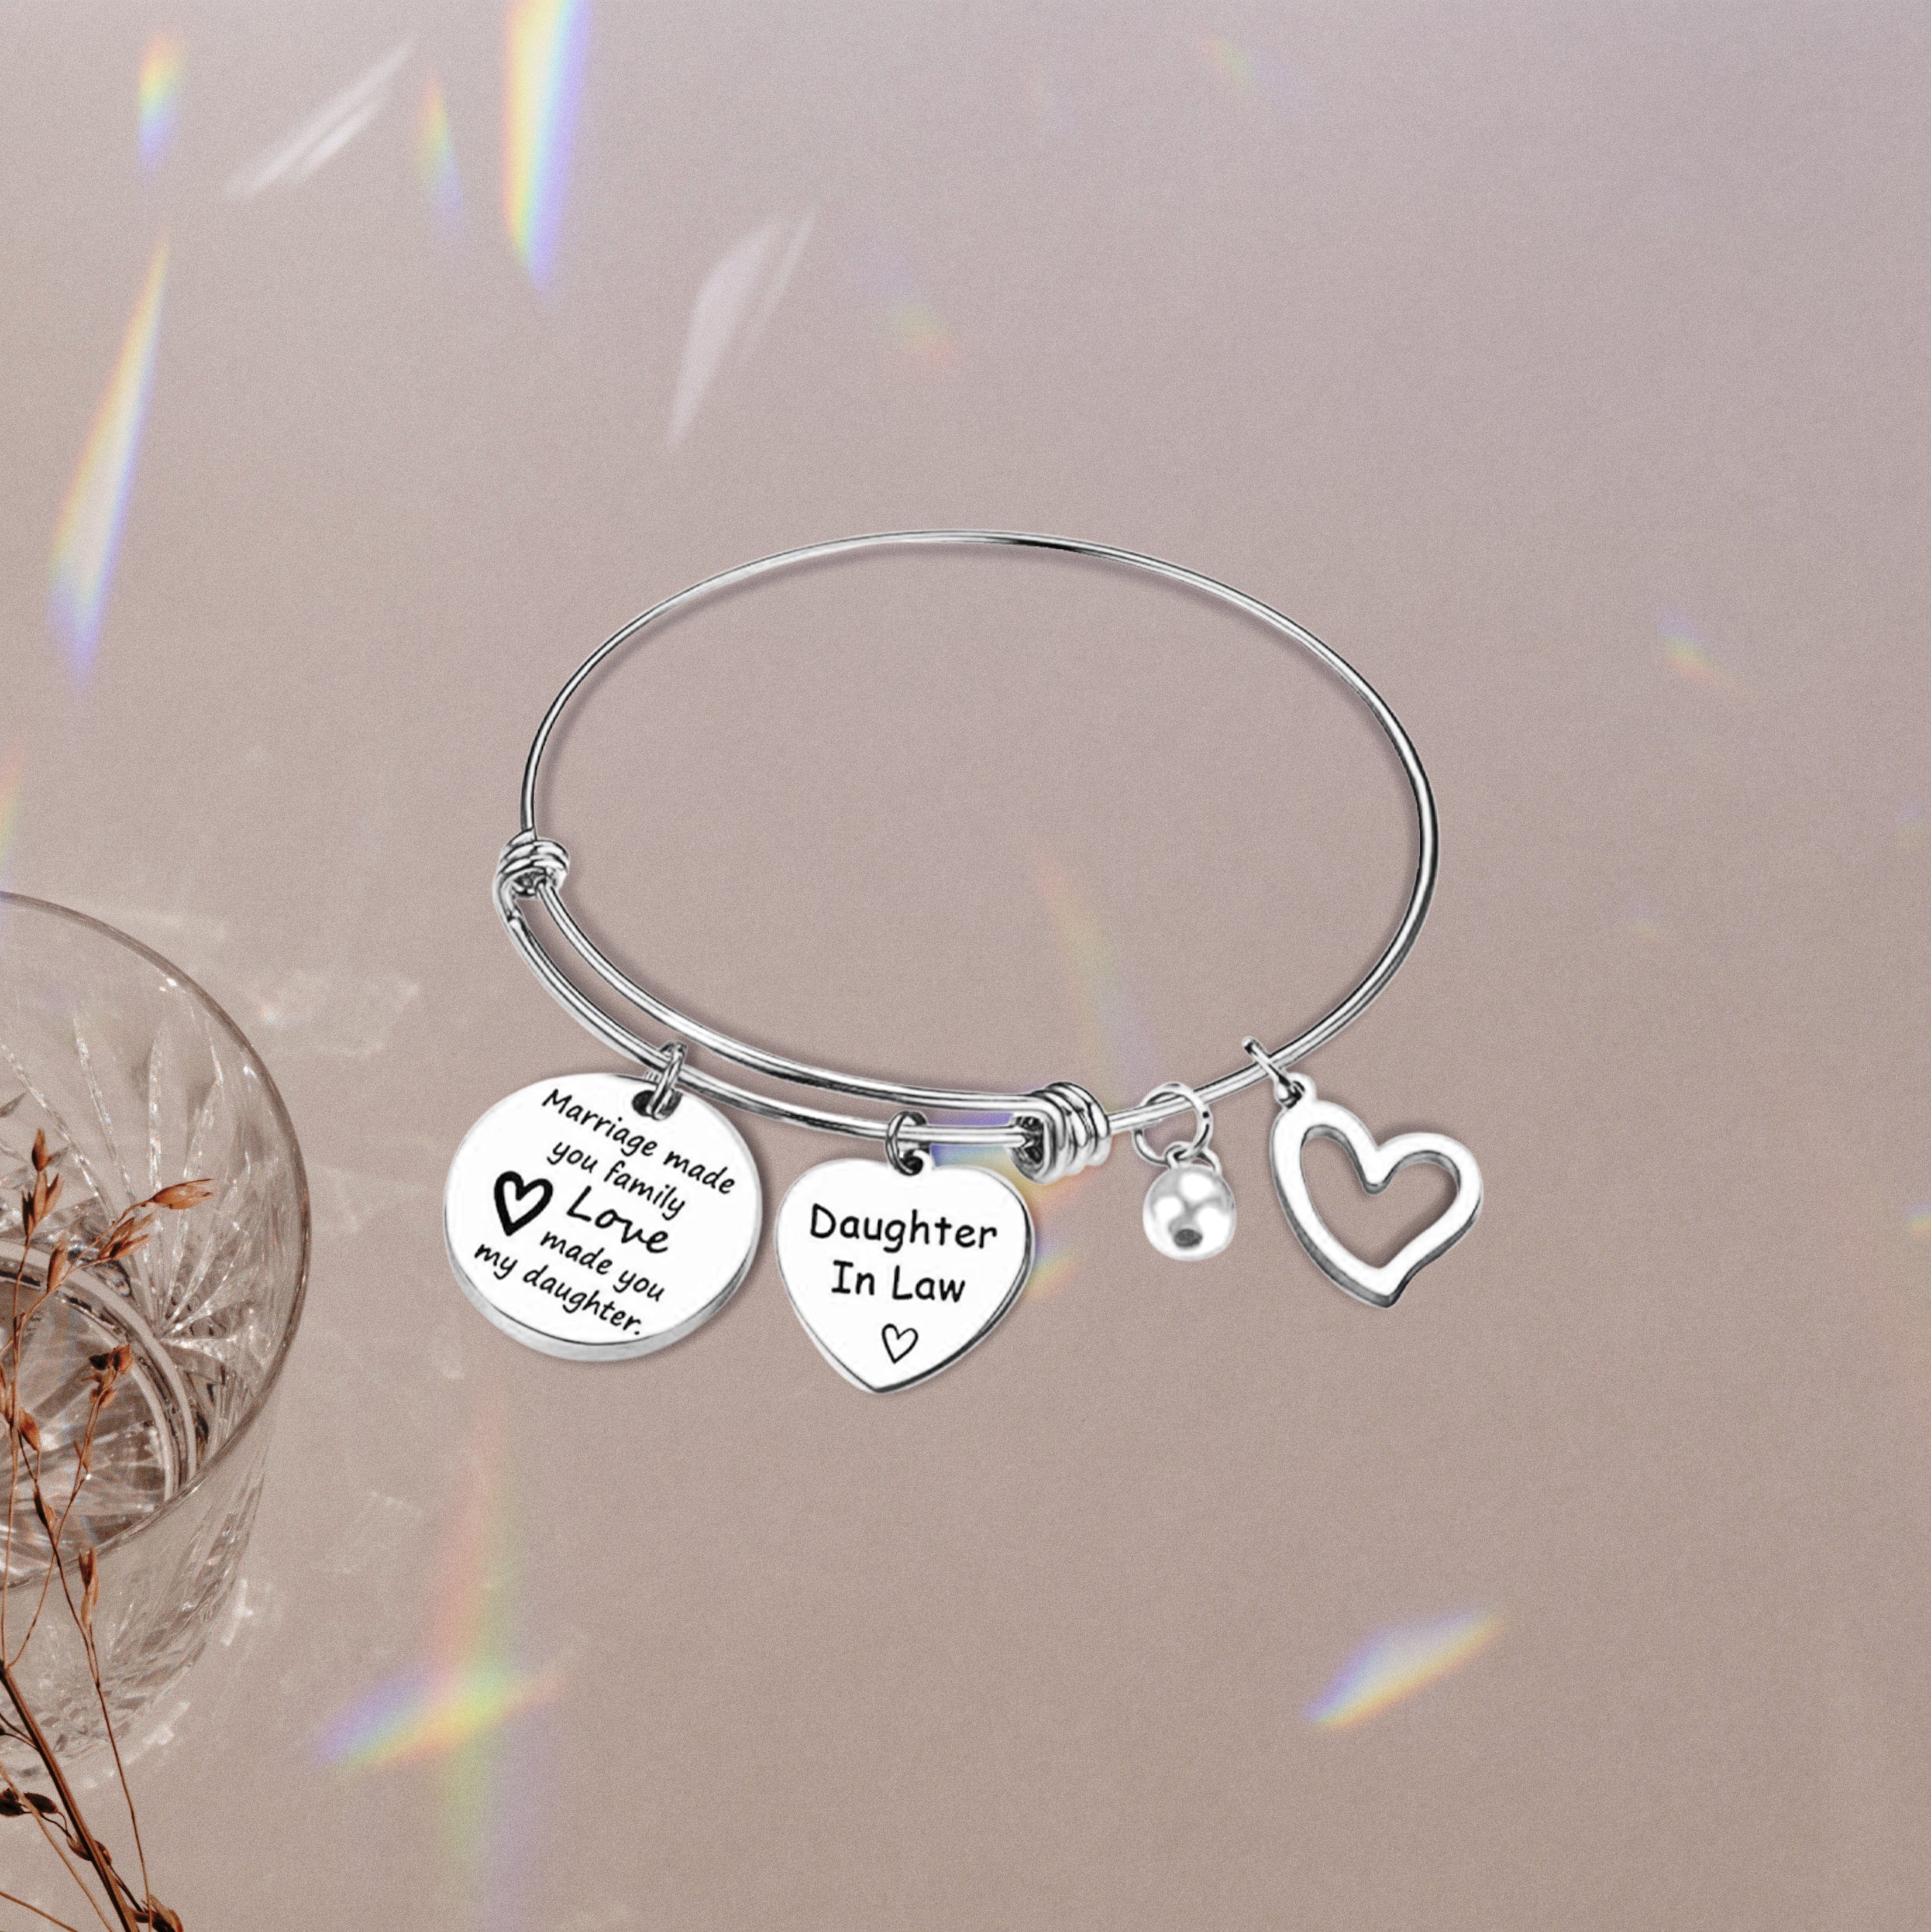 Daughter in Law Heart Expandable Charm Bracelet Silver Adjustable Bangle Meaningful Gift